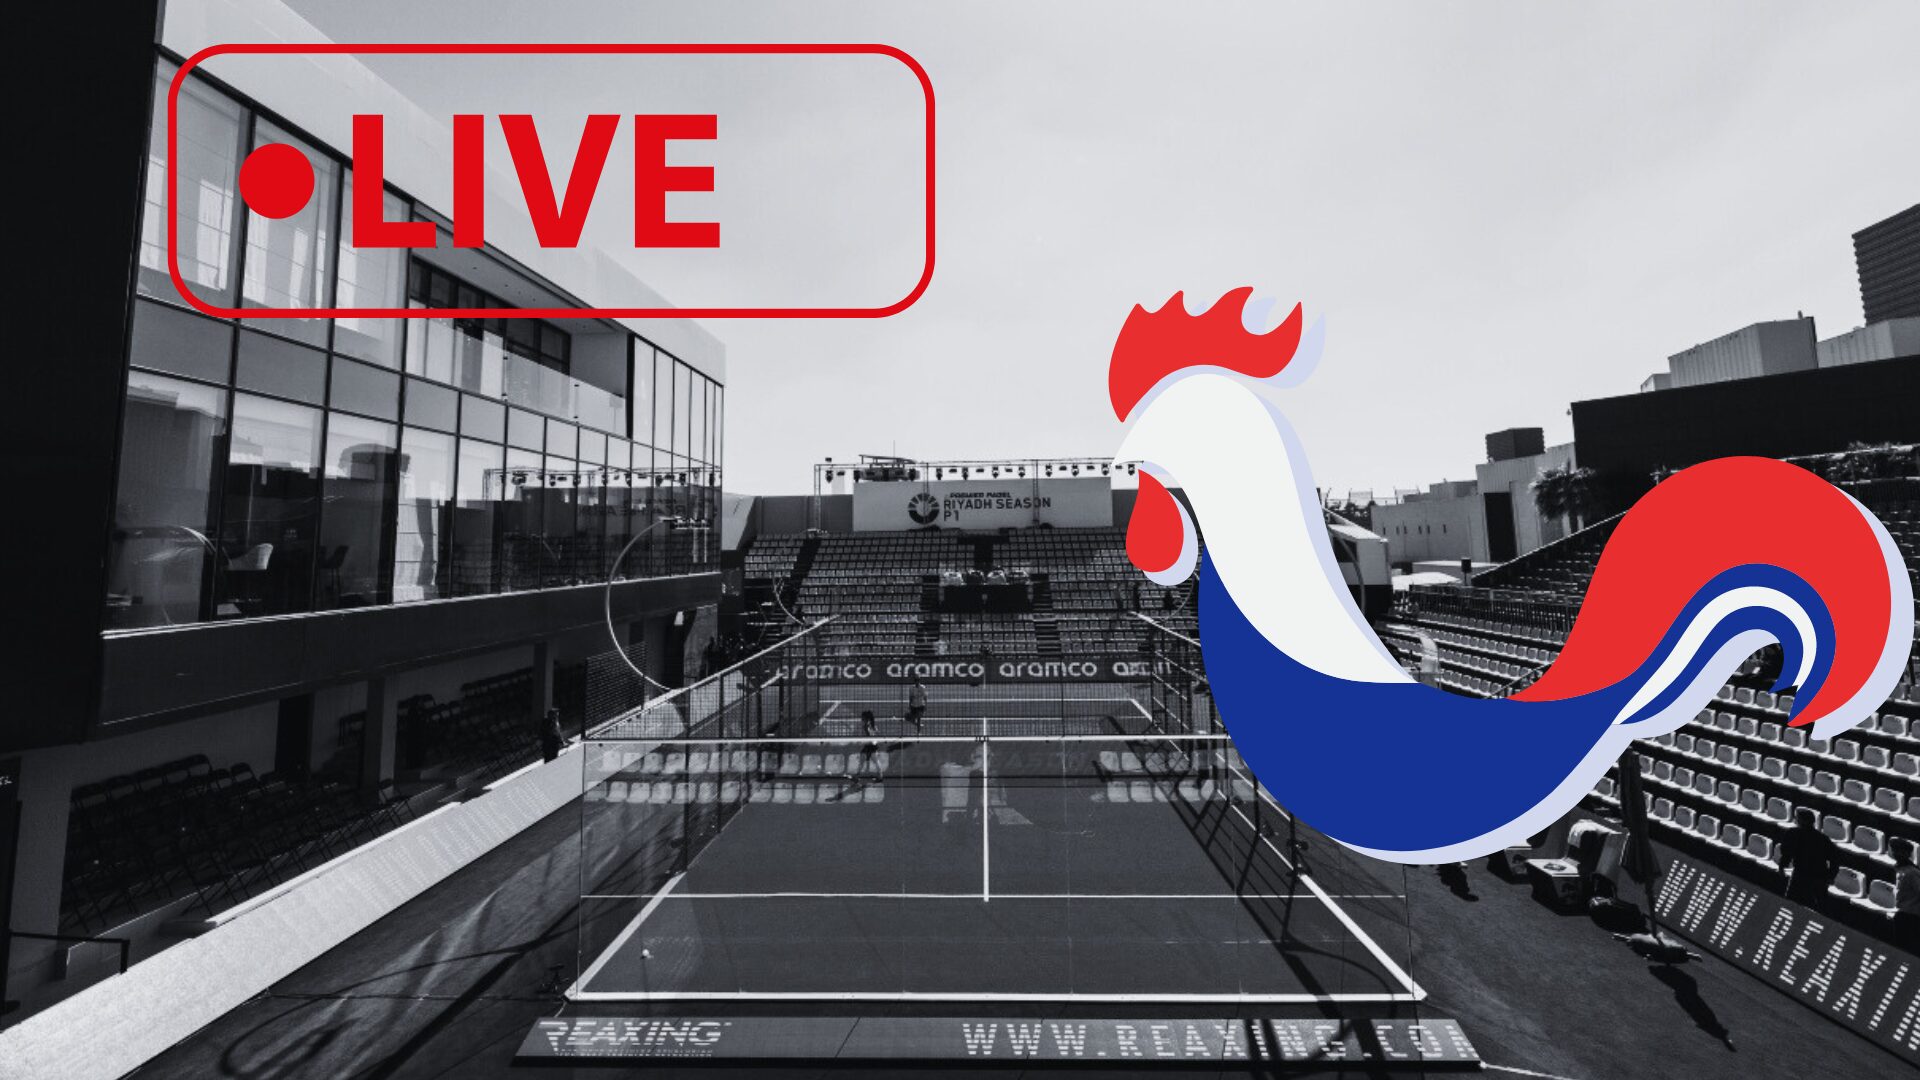 Premier Padel Riyadh P1 – The semi-finals broadcast in France on YouTube!